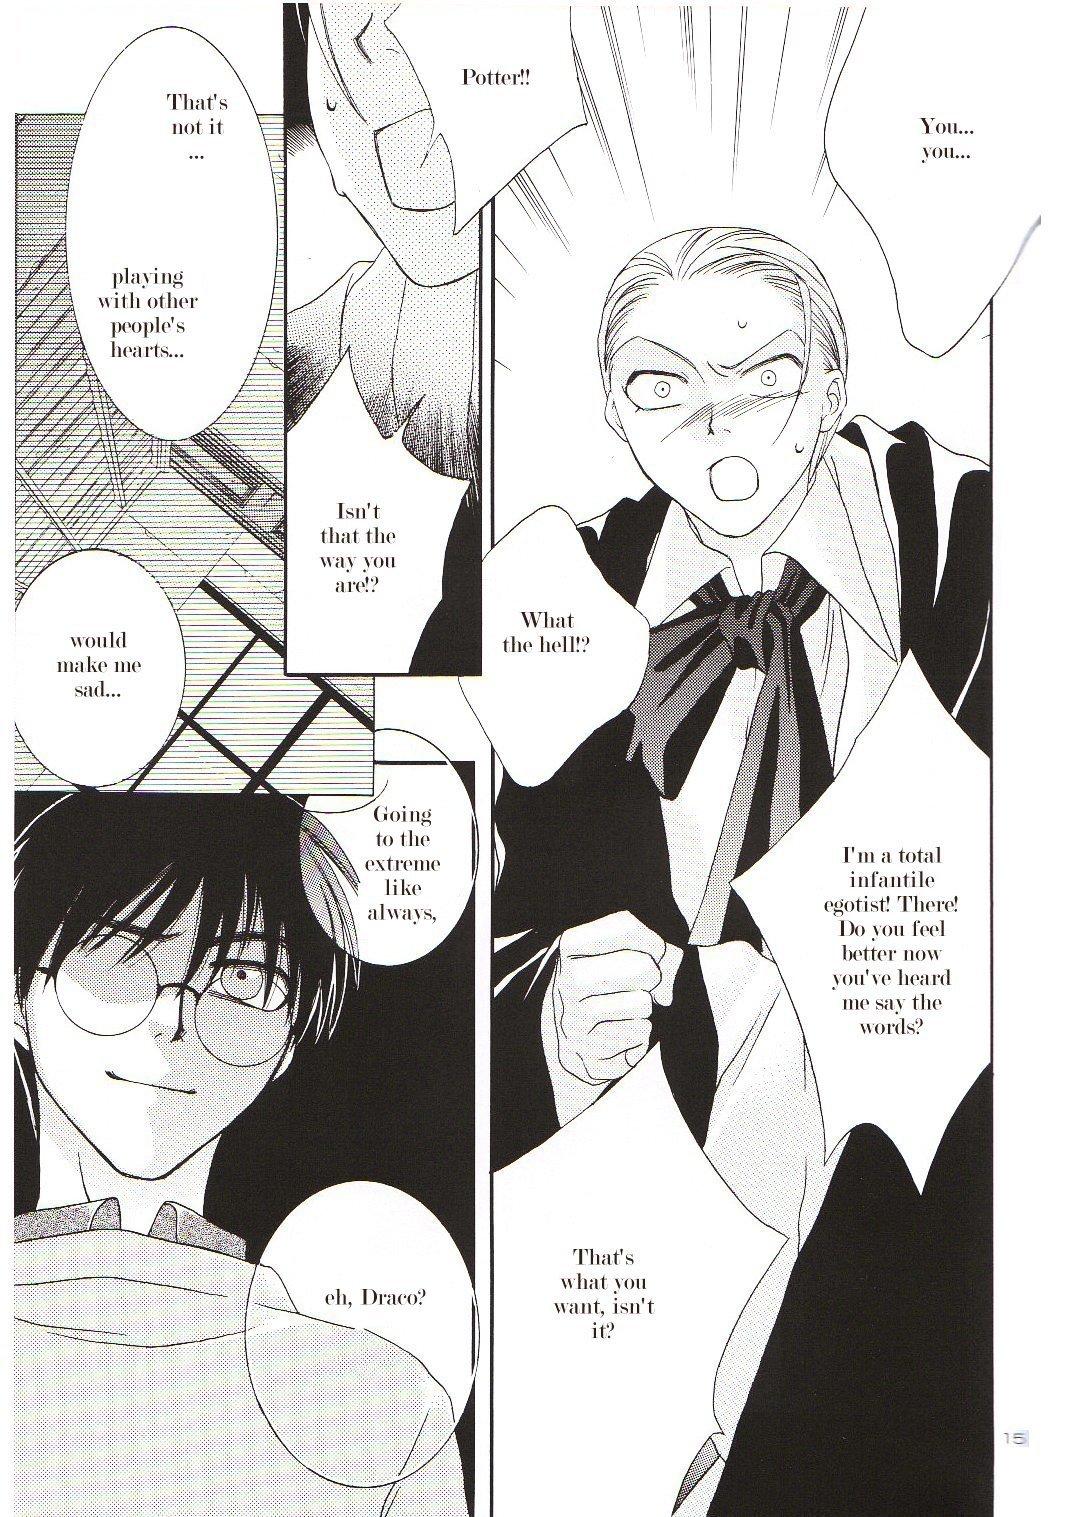 Harry Potter - Day after Day (Doujinshi) - episode 2 - 13